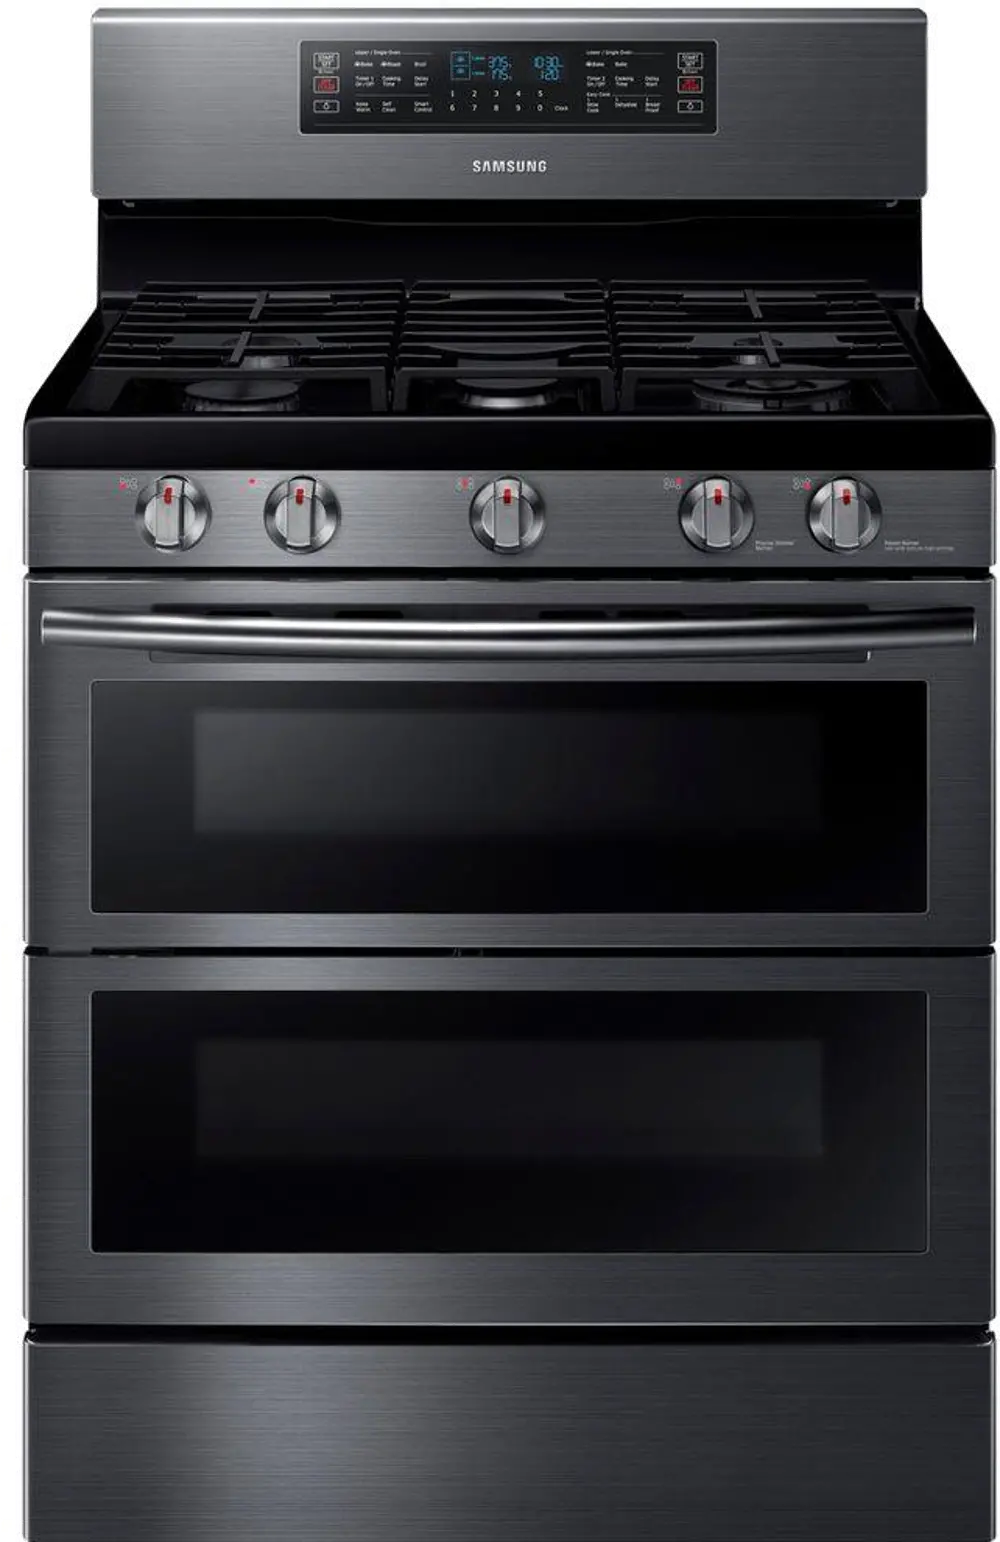 NX58K7850SG Samsung Double Oven Gas Range - 5.8 cu. ft. Black Stainless Steel-1